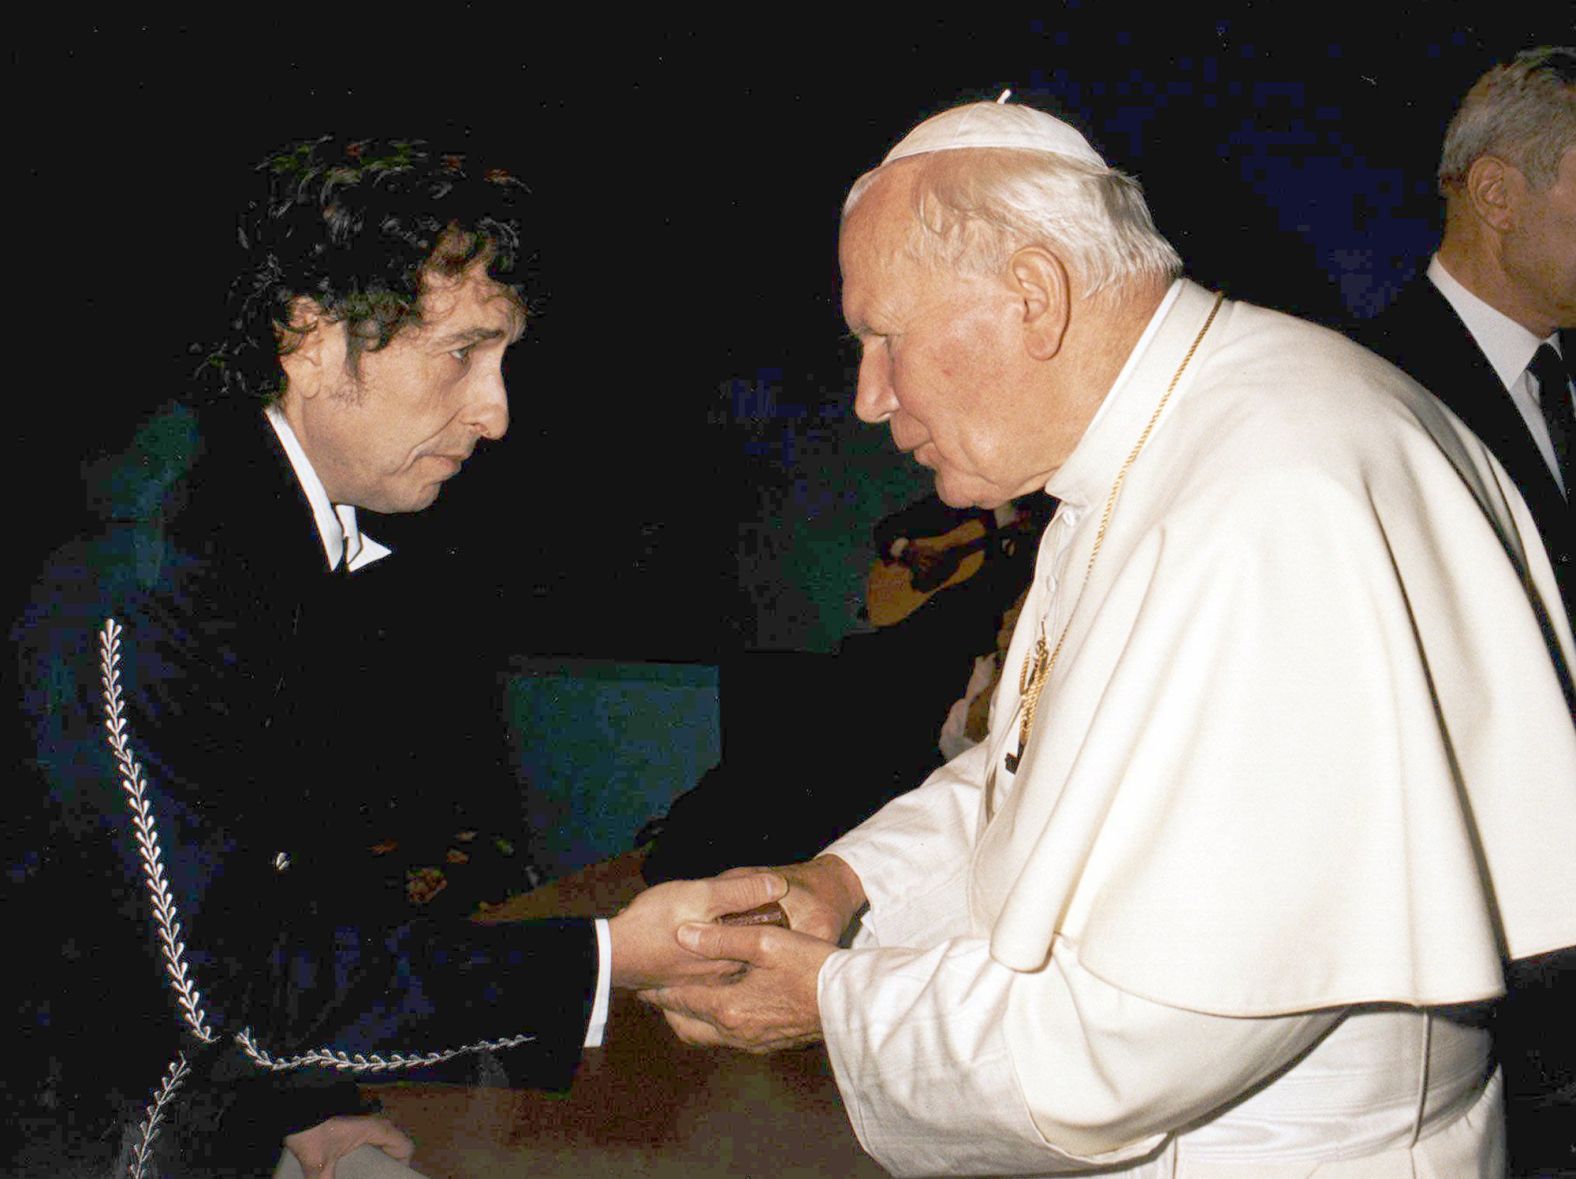 Pope John Paul II greets Dylan, who performed at a concert in the Pope's honor in Bologna, Italy, in 1997.